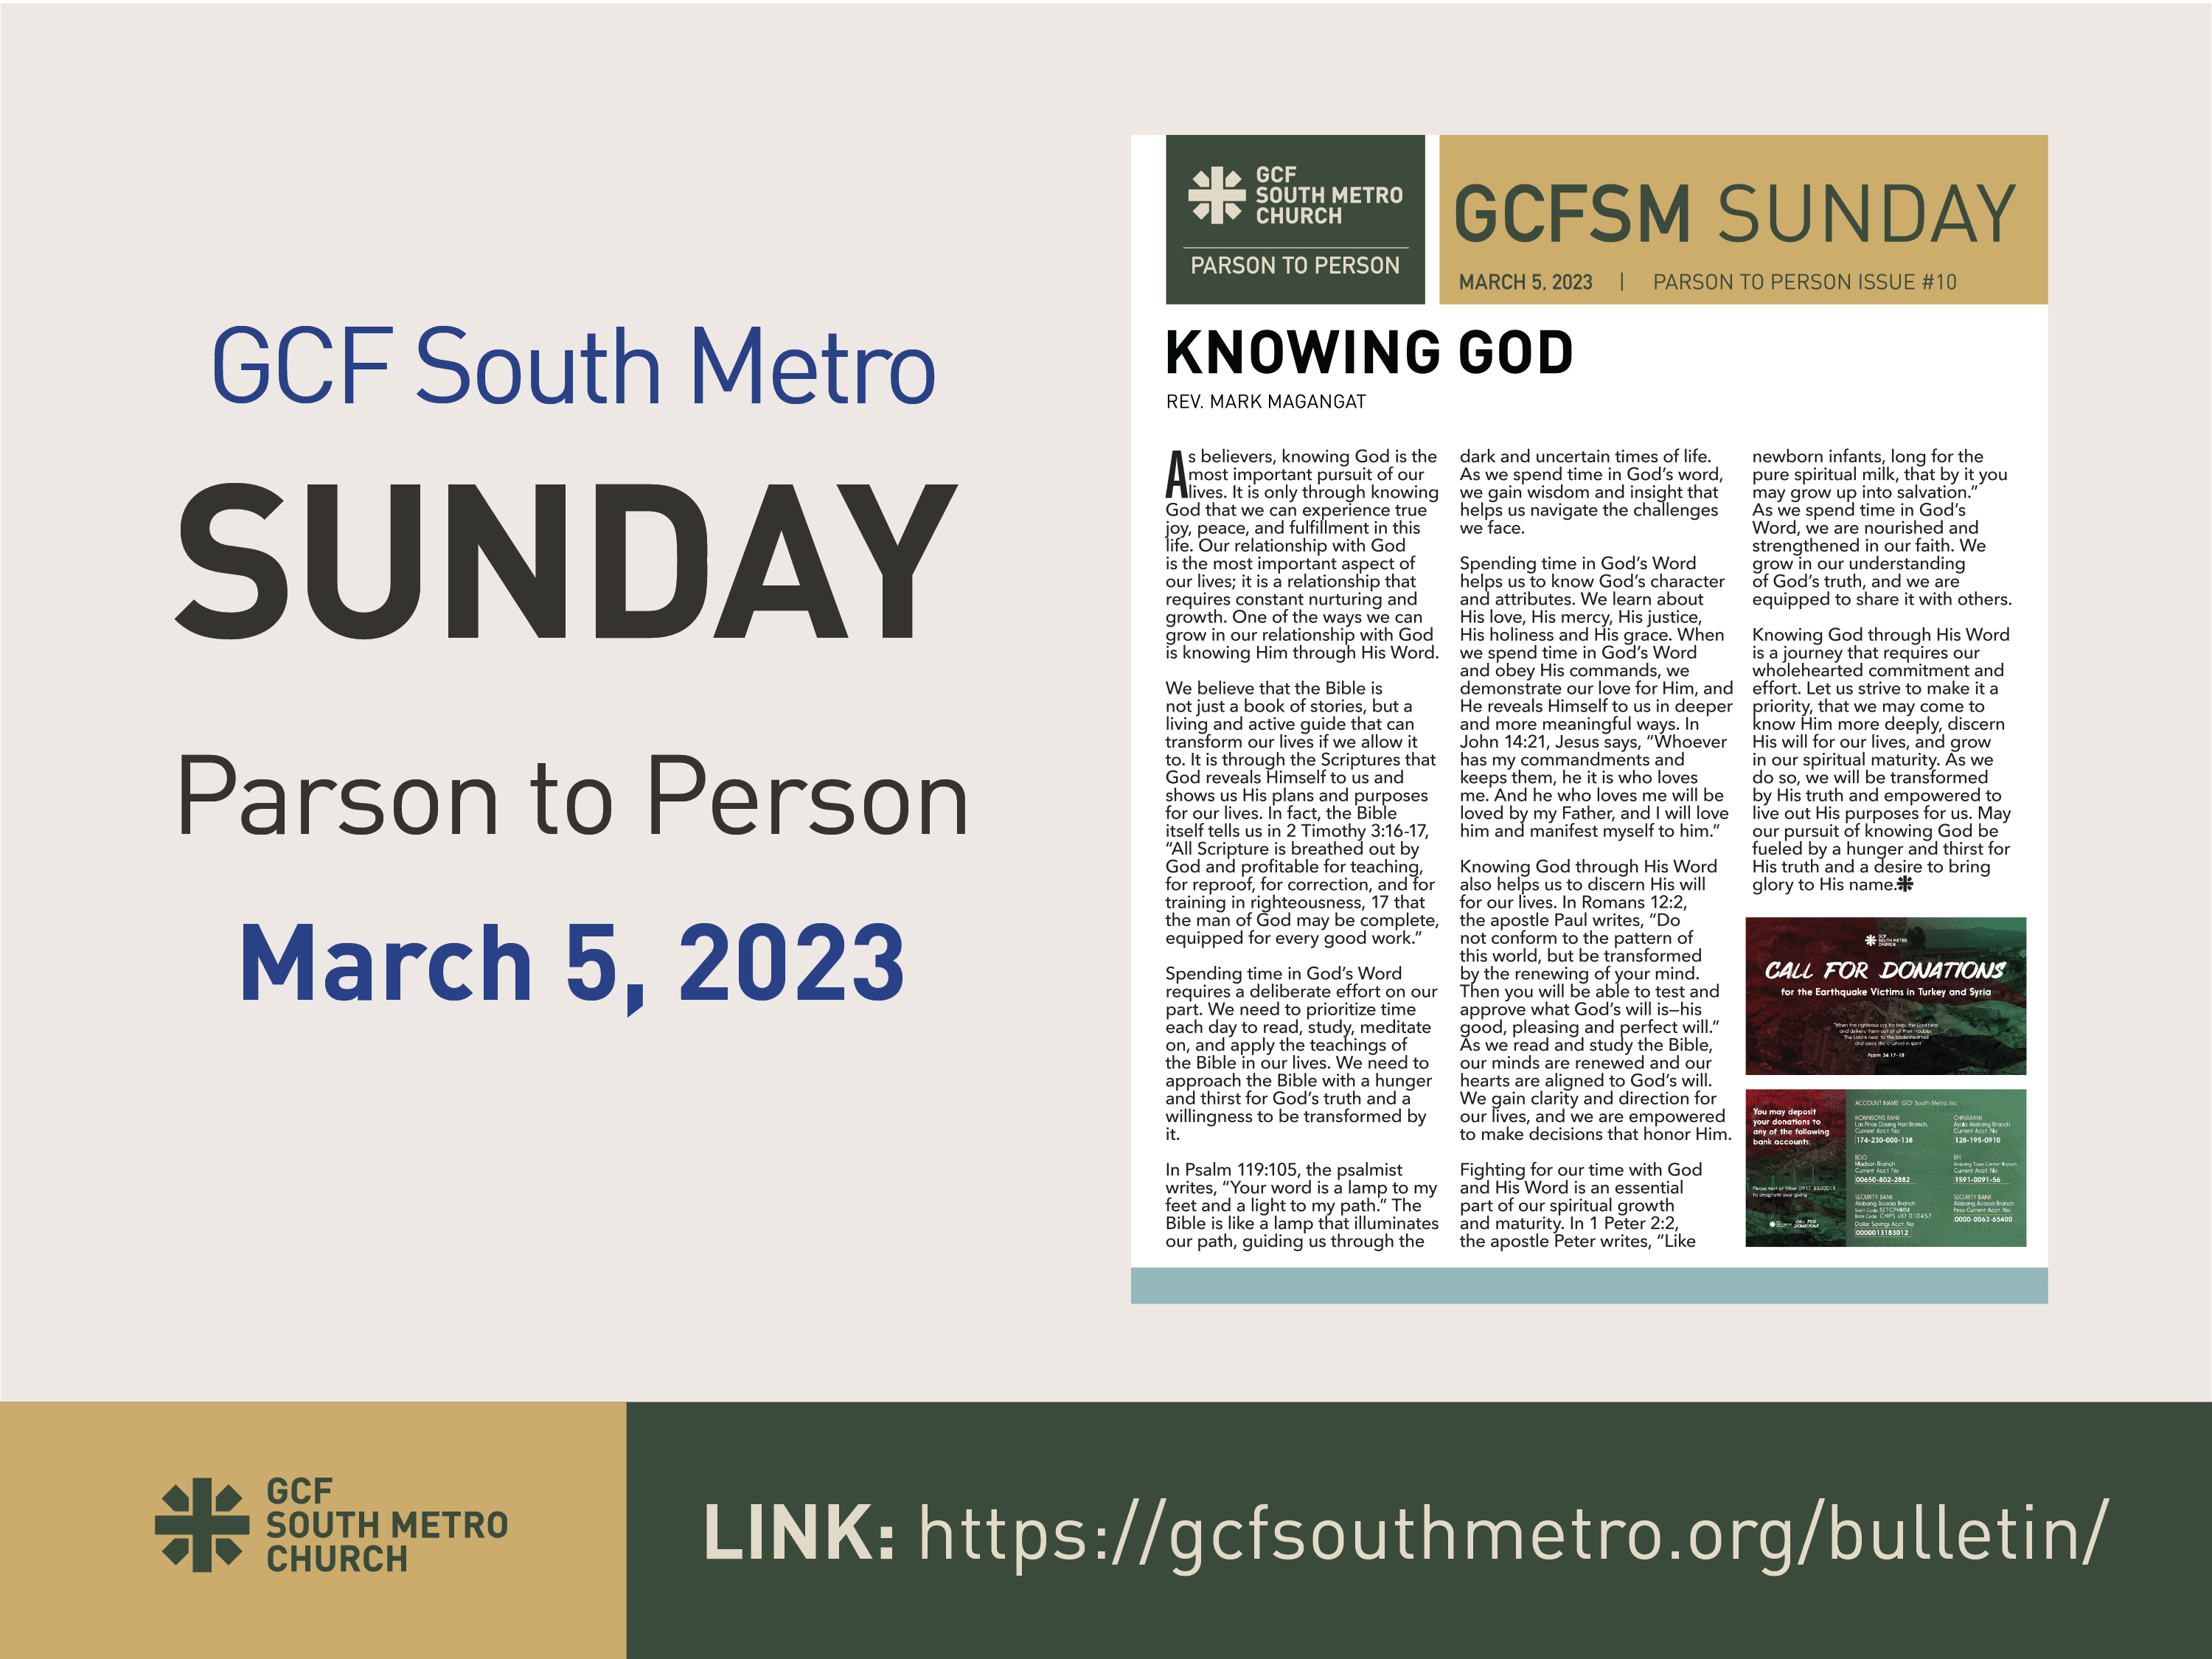 Sunday Bulletin – Parson to Person, March 5, 2023